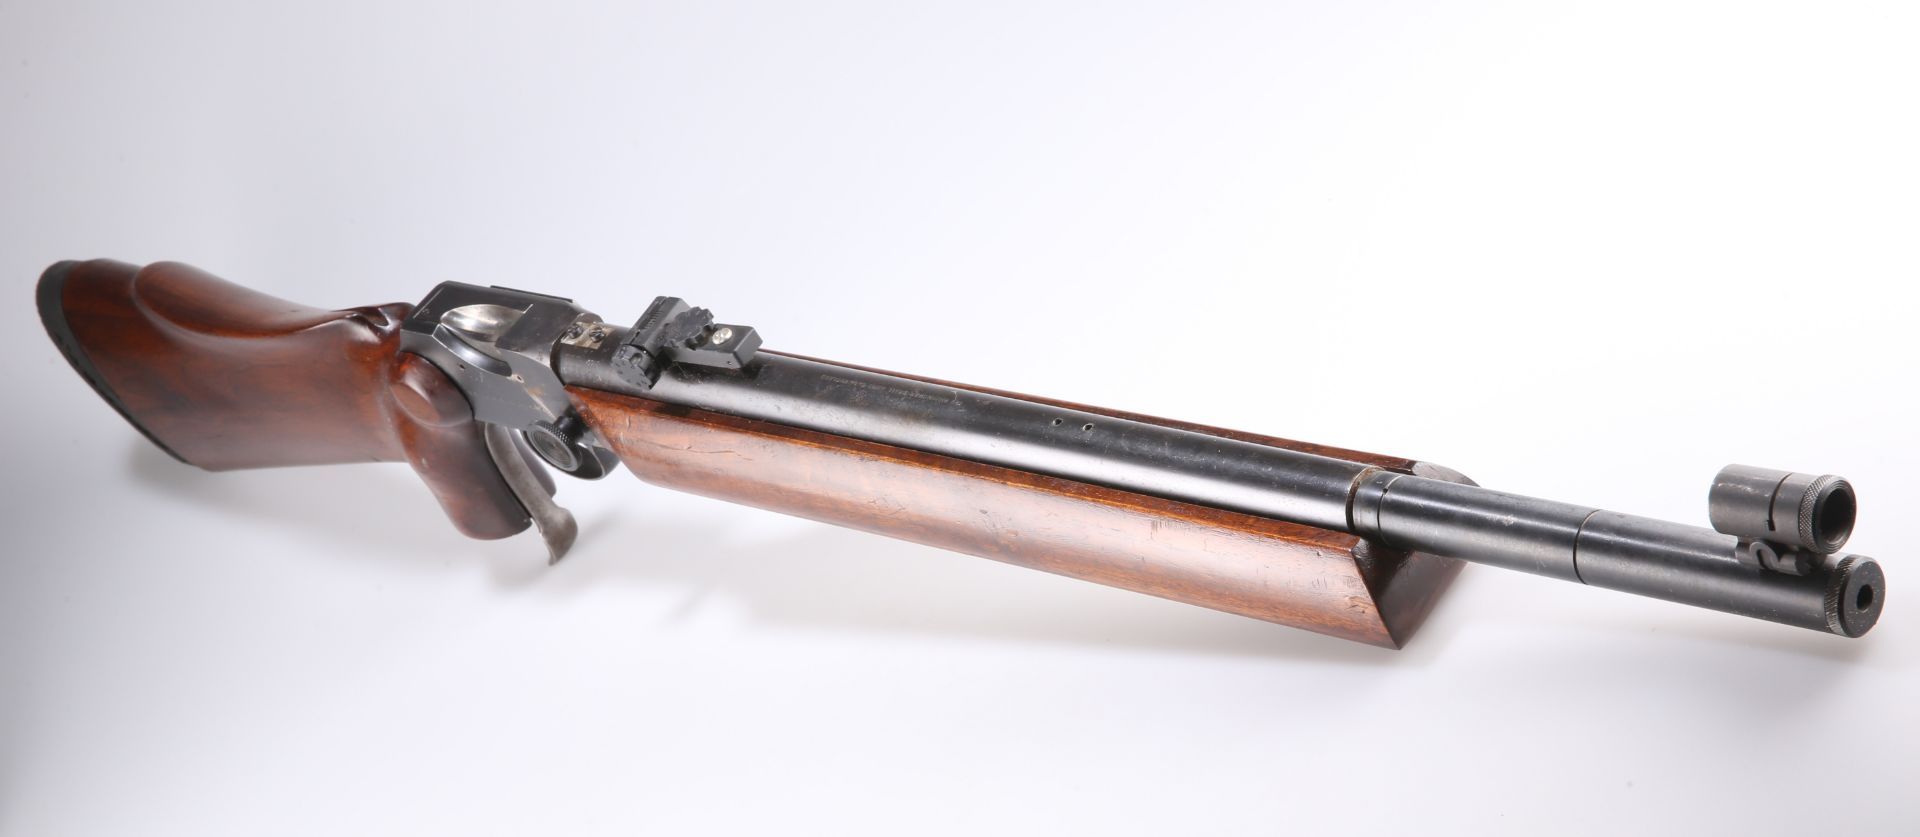 A DEACTIVATED BSA MARTINI ACTION .22 CAL TARGET RIFLE - Image 2 of 3